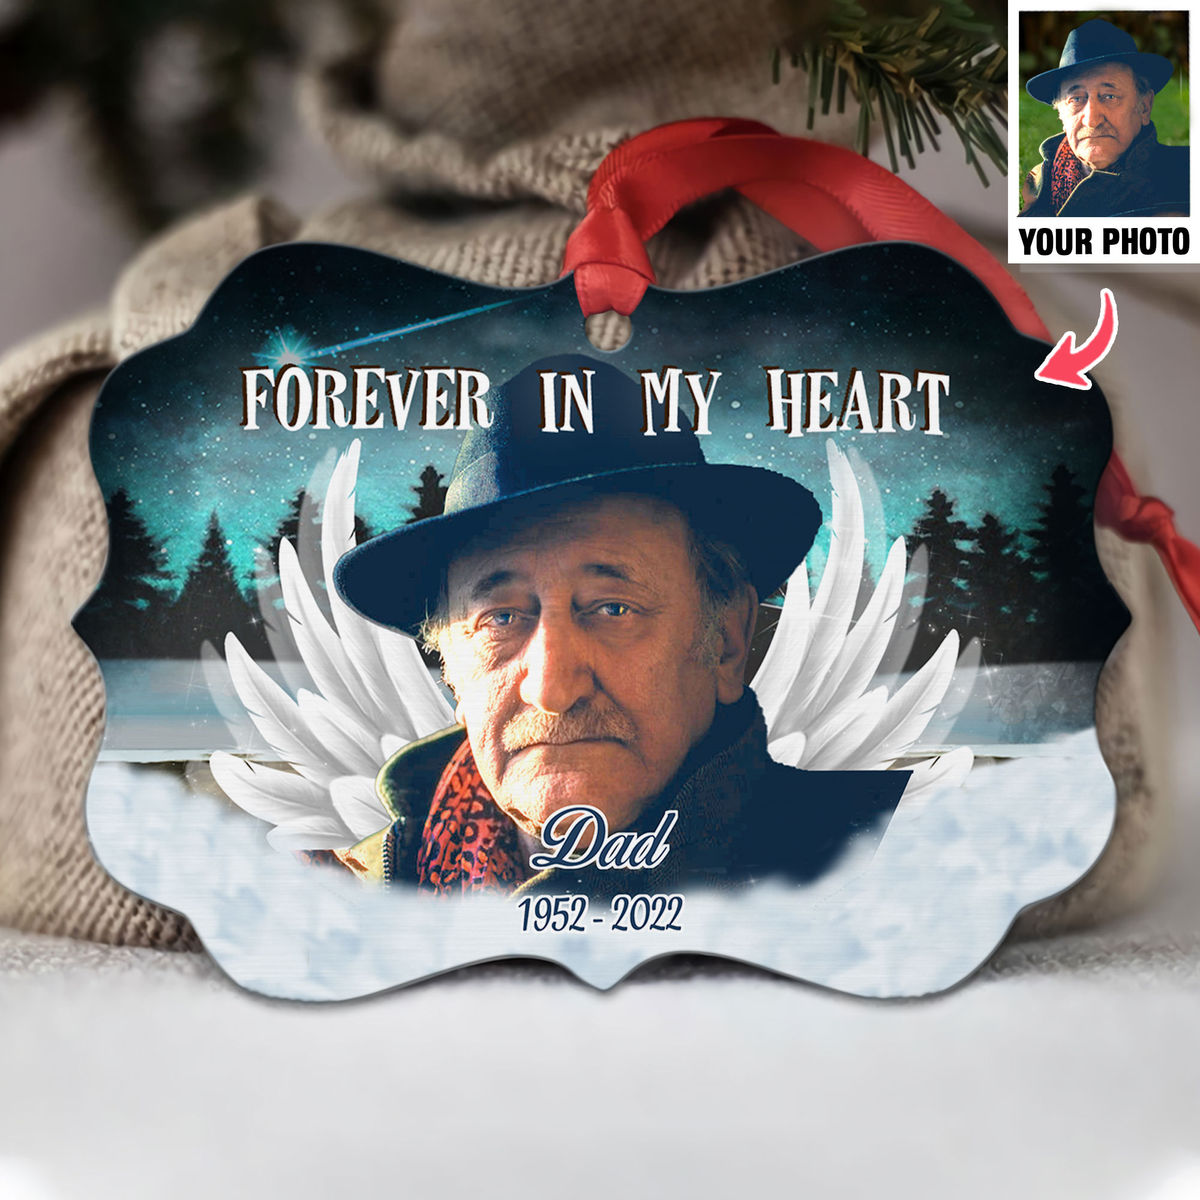 Family Memorial Ornament - Forever In My Heart - Custom Ornament from Photo - Christmas Gifts For Family